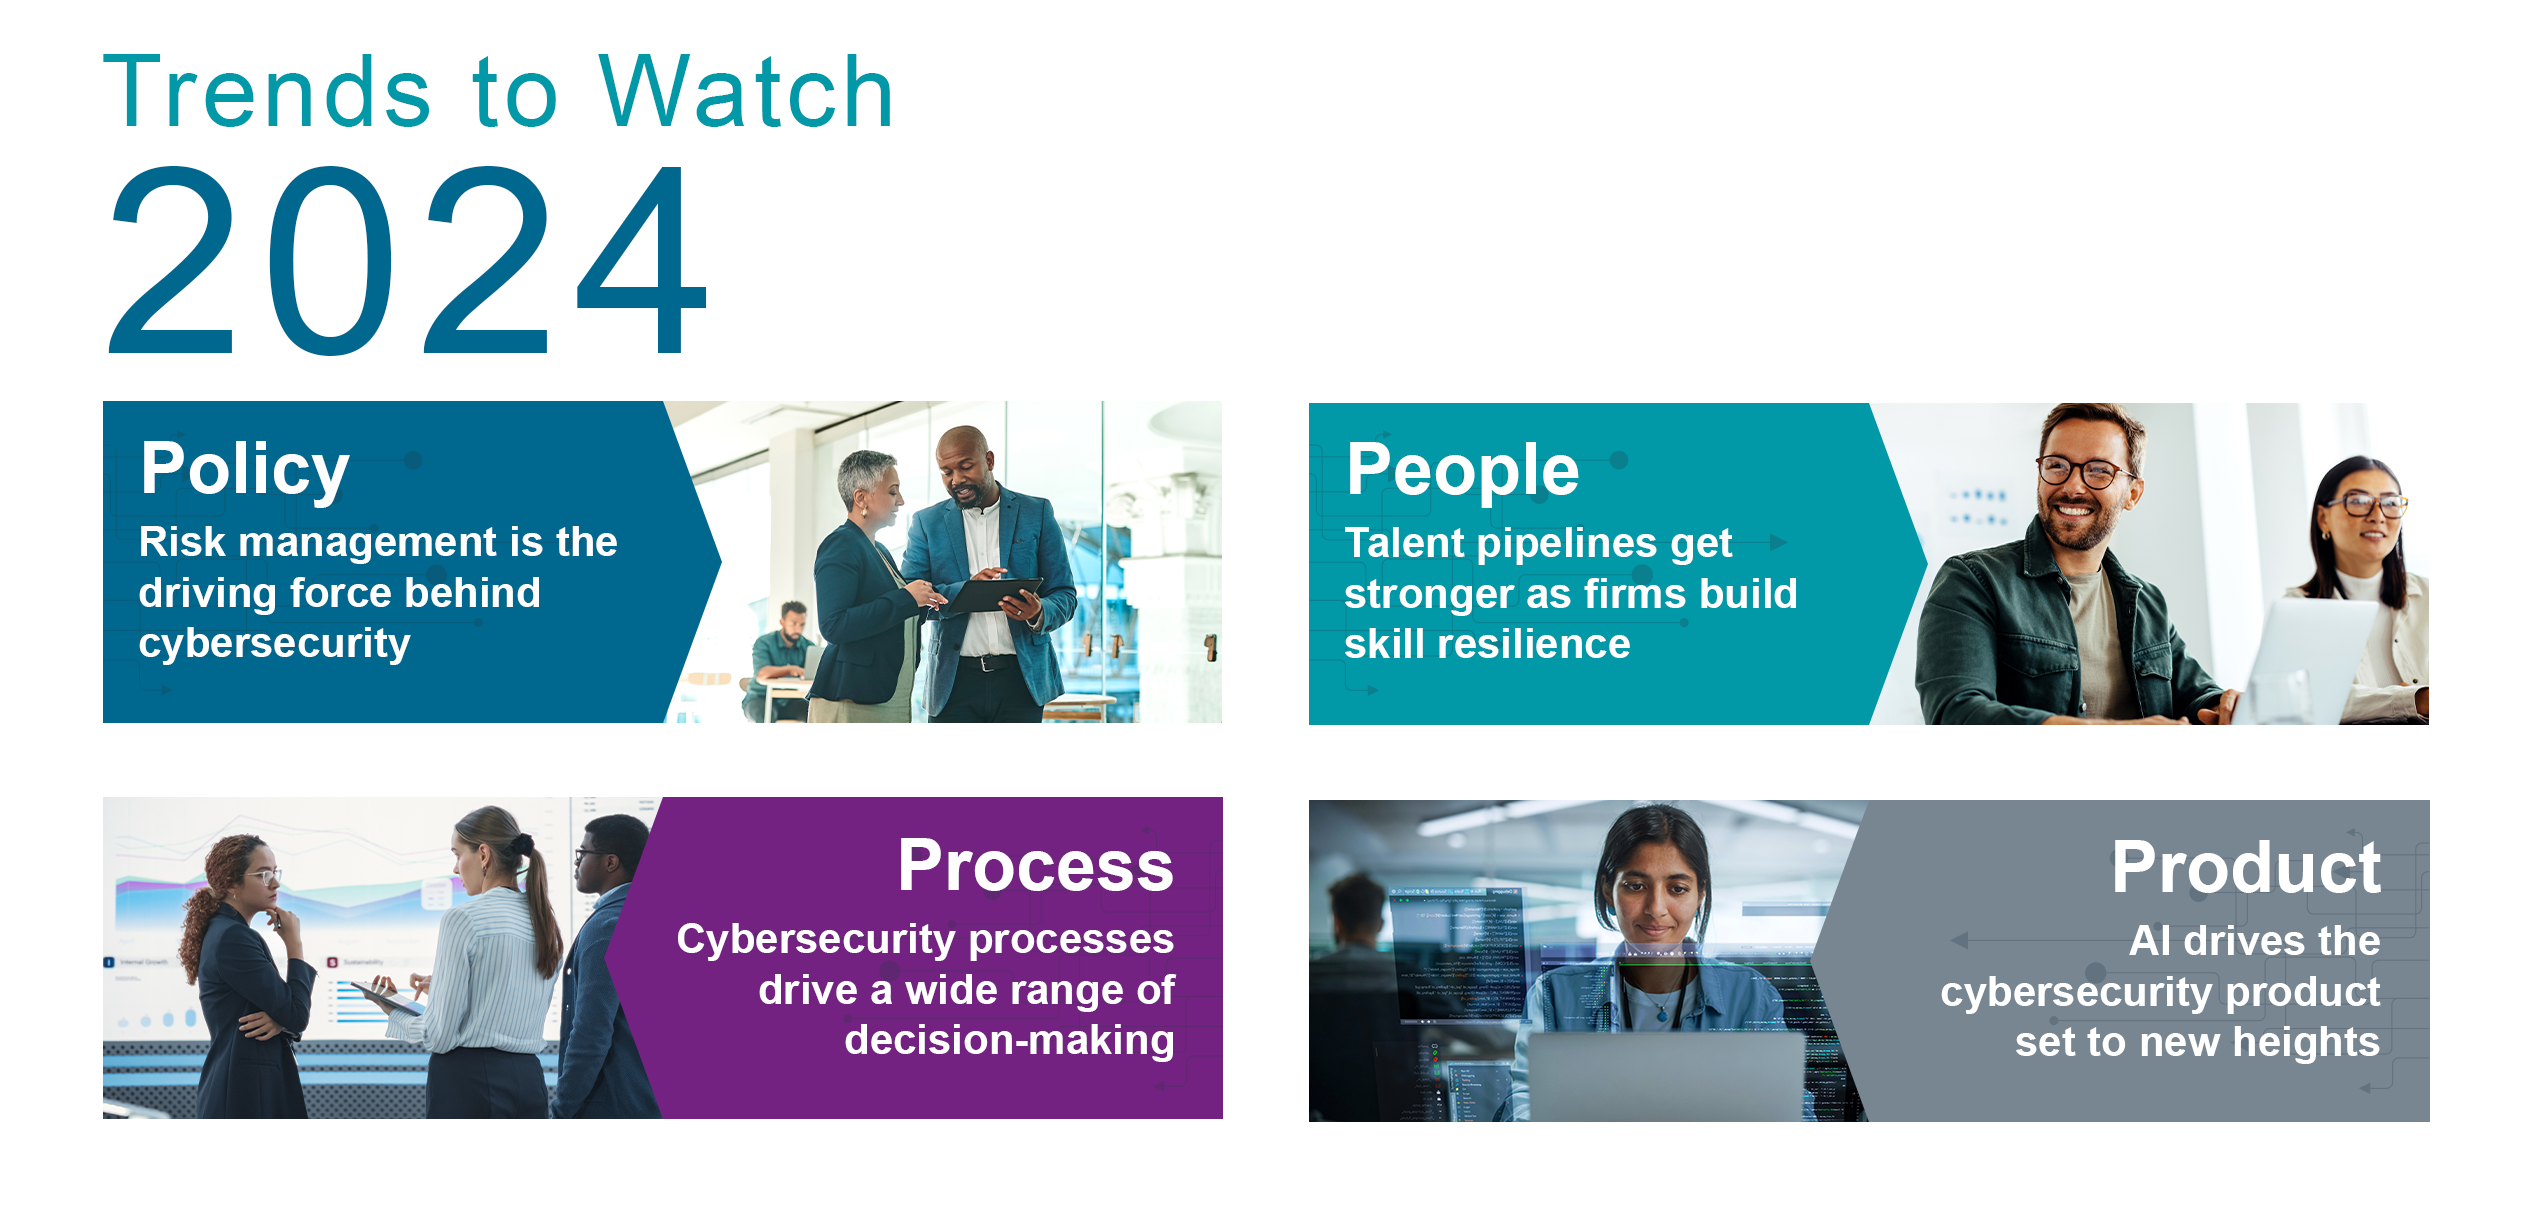 Trends to watch 2024: 1) Policy - Risk management is the driving force behind cybersecurity. 2) Process - Cybersecurity processes drive a wide range of decision-making. 3) People - Talent pipelines get stronger as firms build skill resilience. 4) Product - AI drives the cybersecurity product set to new heights.